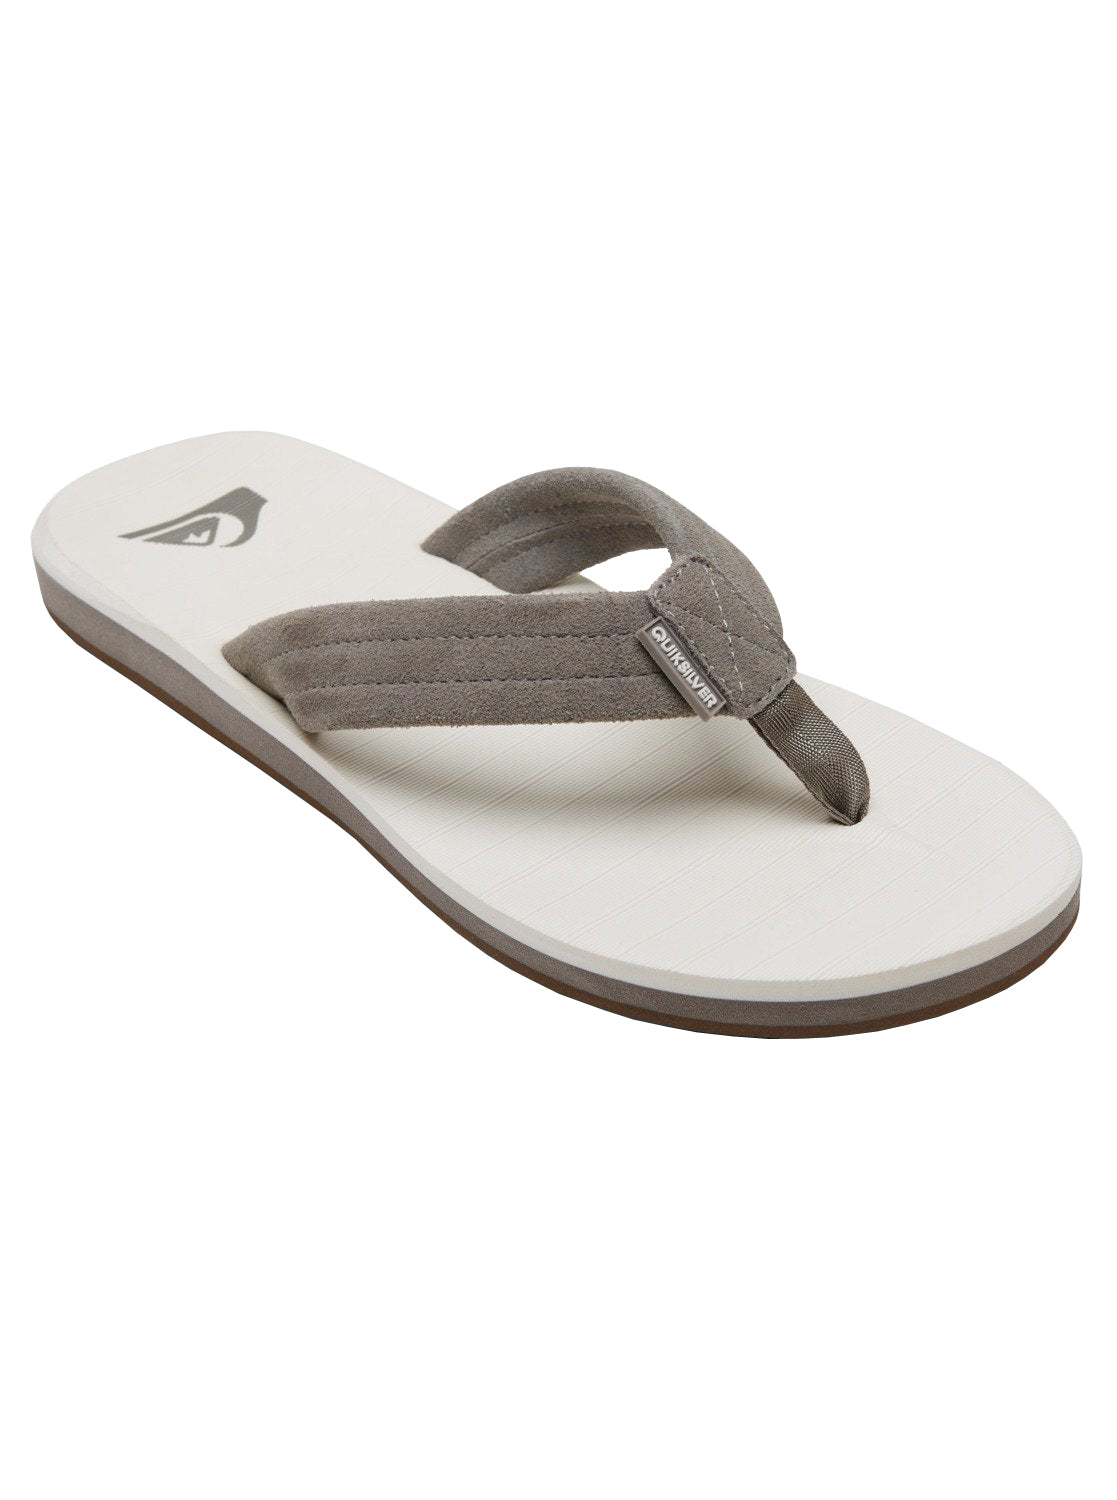 Quiksilver Carver Suede Mens Sandal XSWS-Grey-White-Grey 12